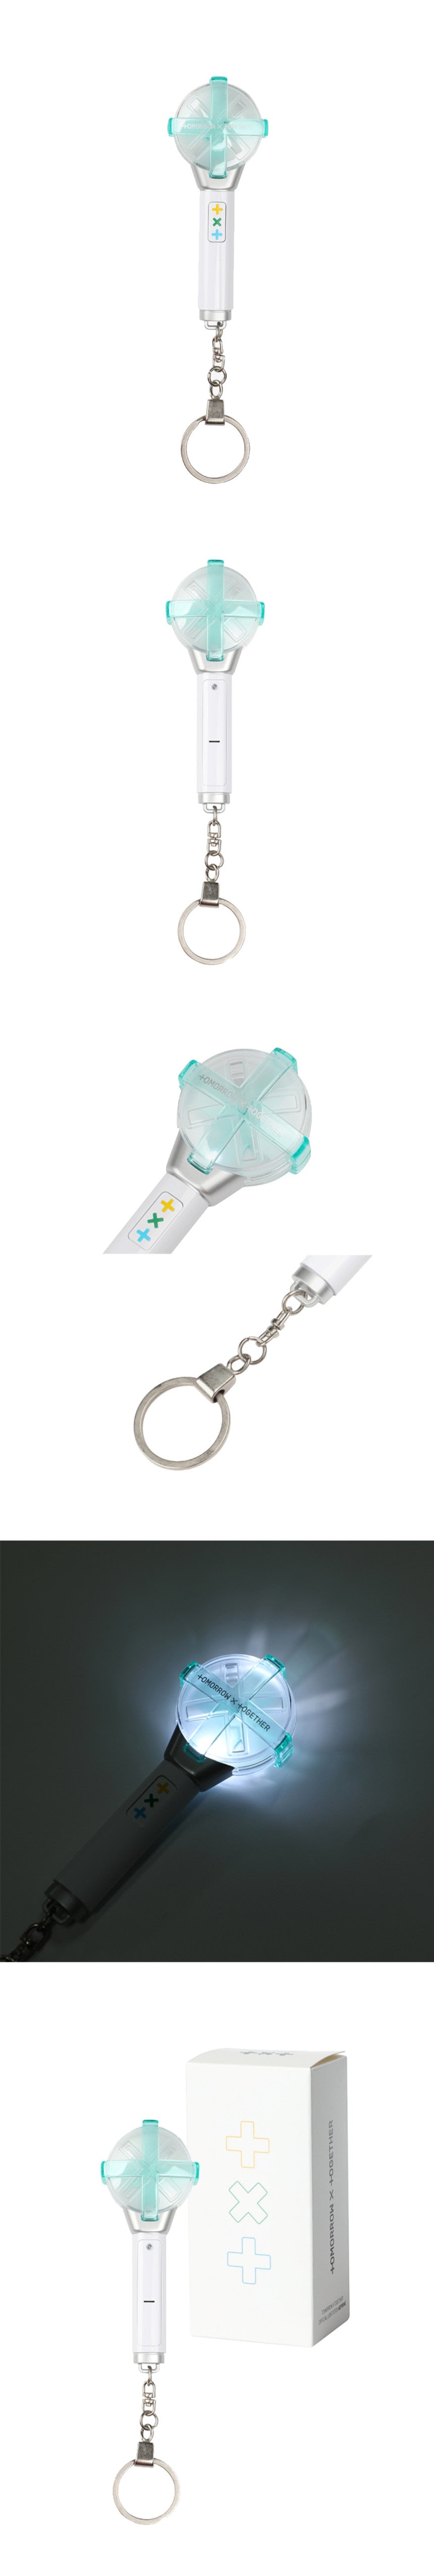 [TOMORROW X TOGETHER] Official Light Stick Keyring